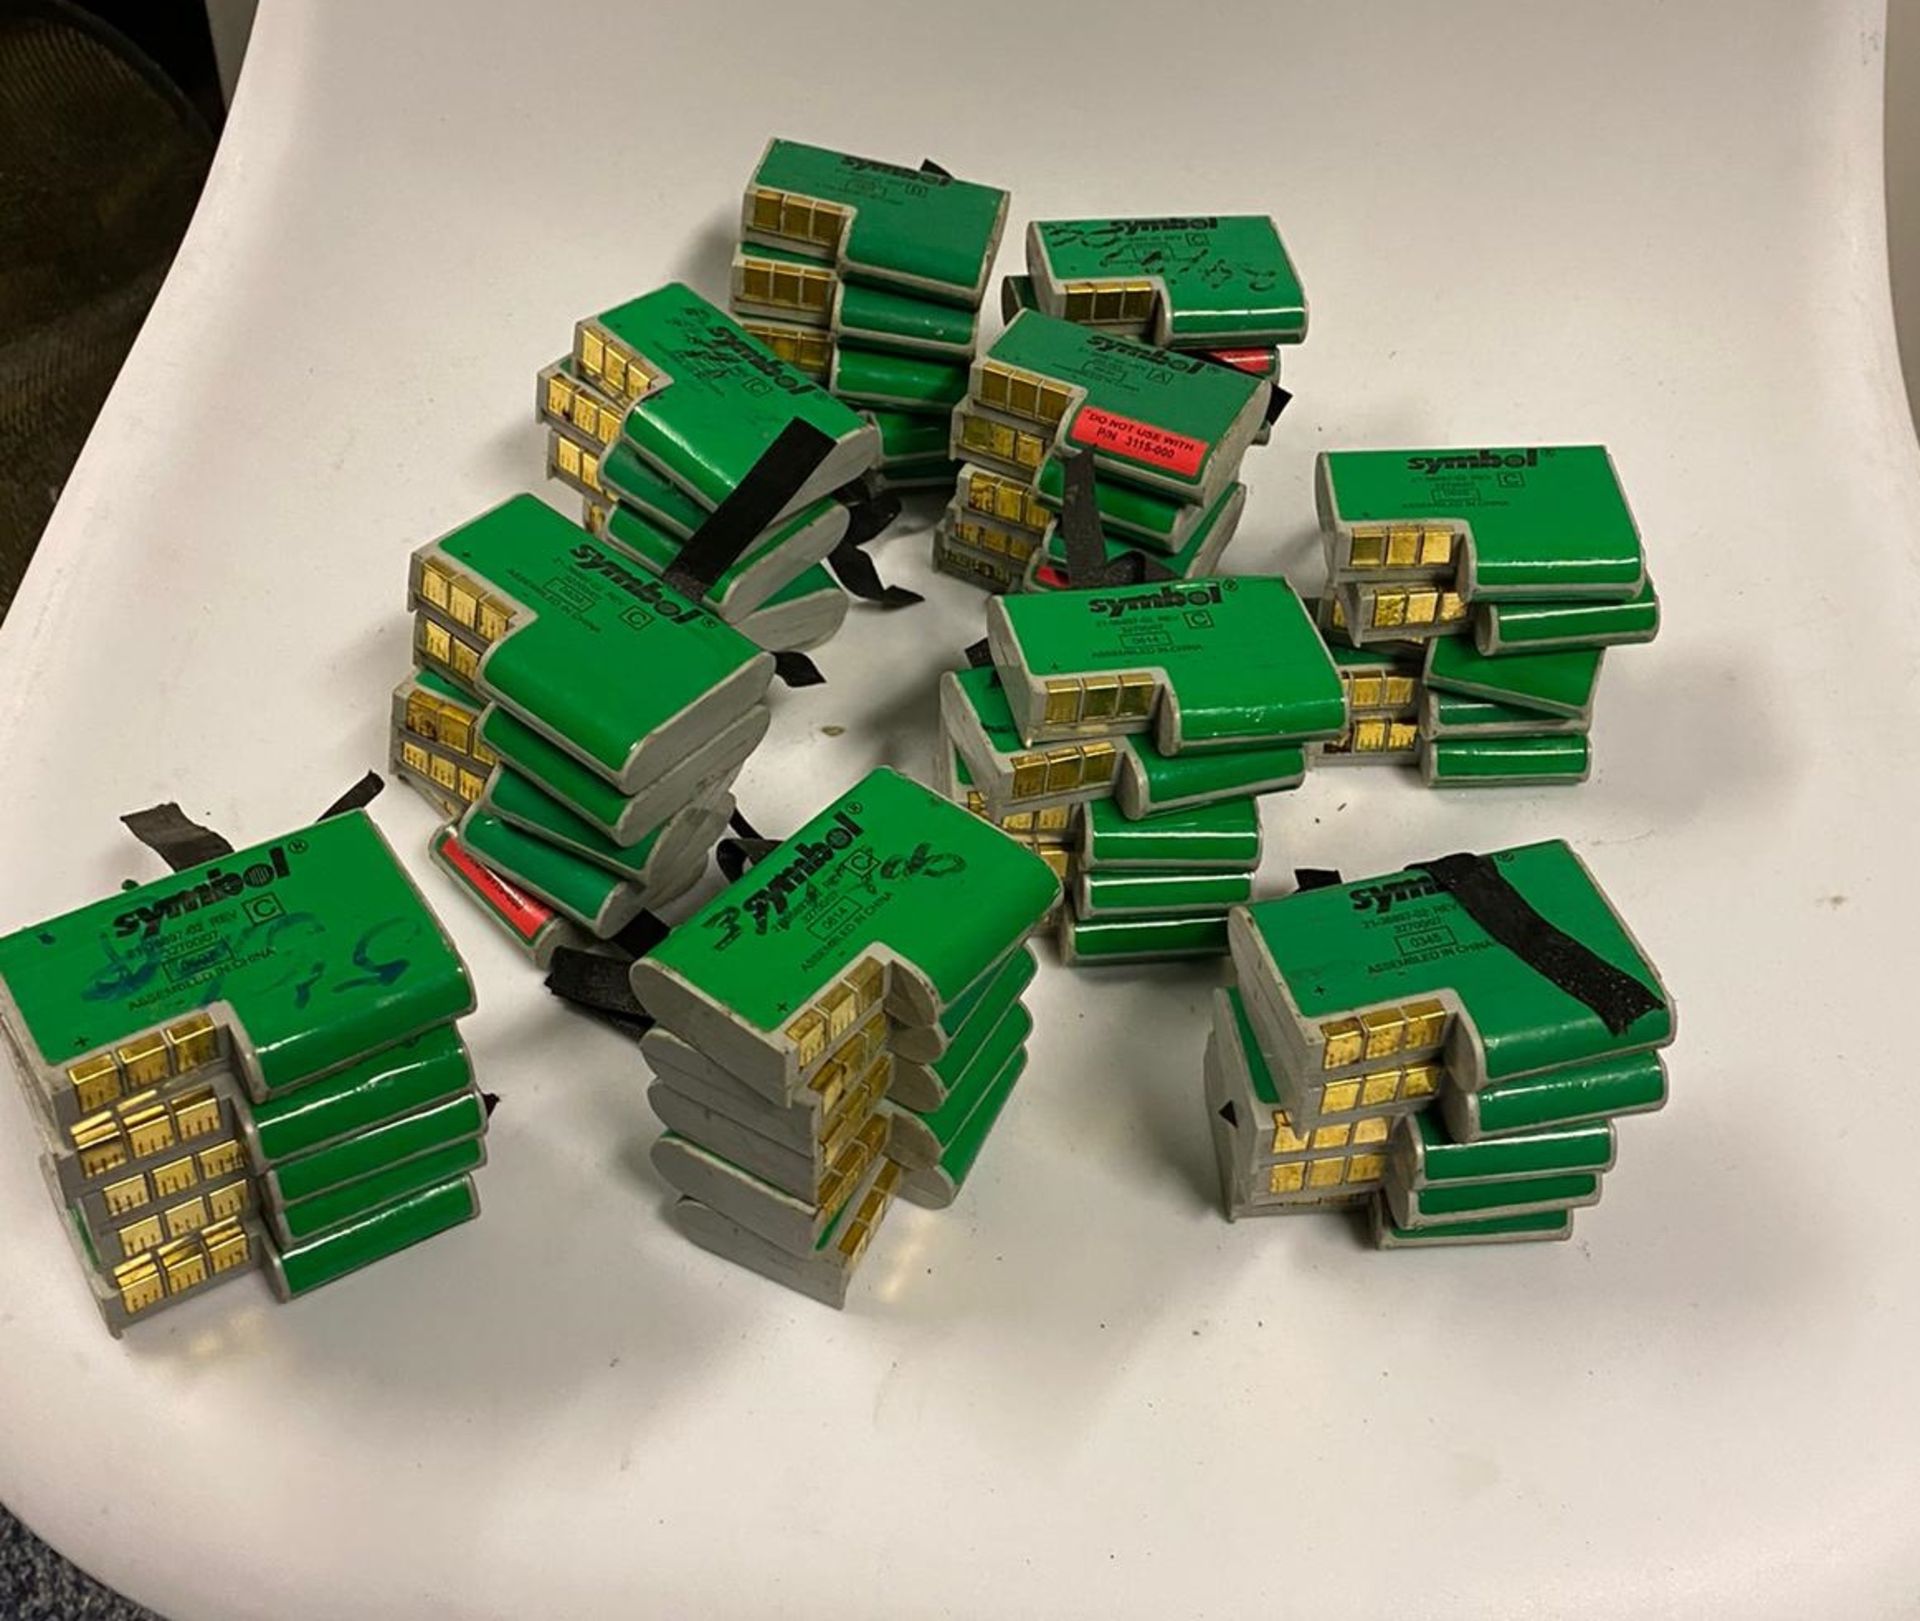 5 x Symbol 21-36897-02 Rechargeable 6.0V Batteries - Used Condition - Location: Altrincham WA14 - - Image 2 of 5